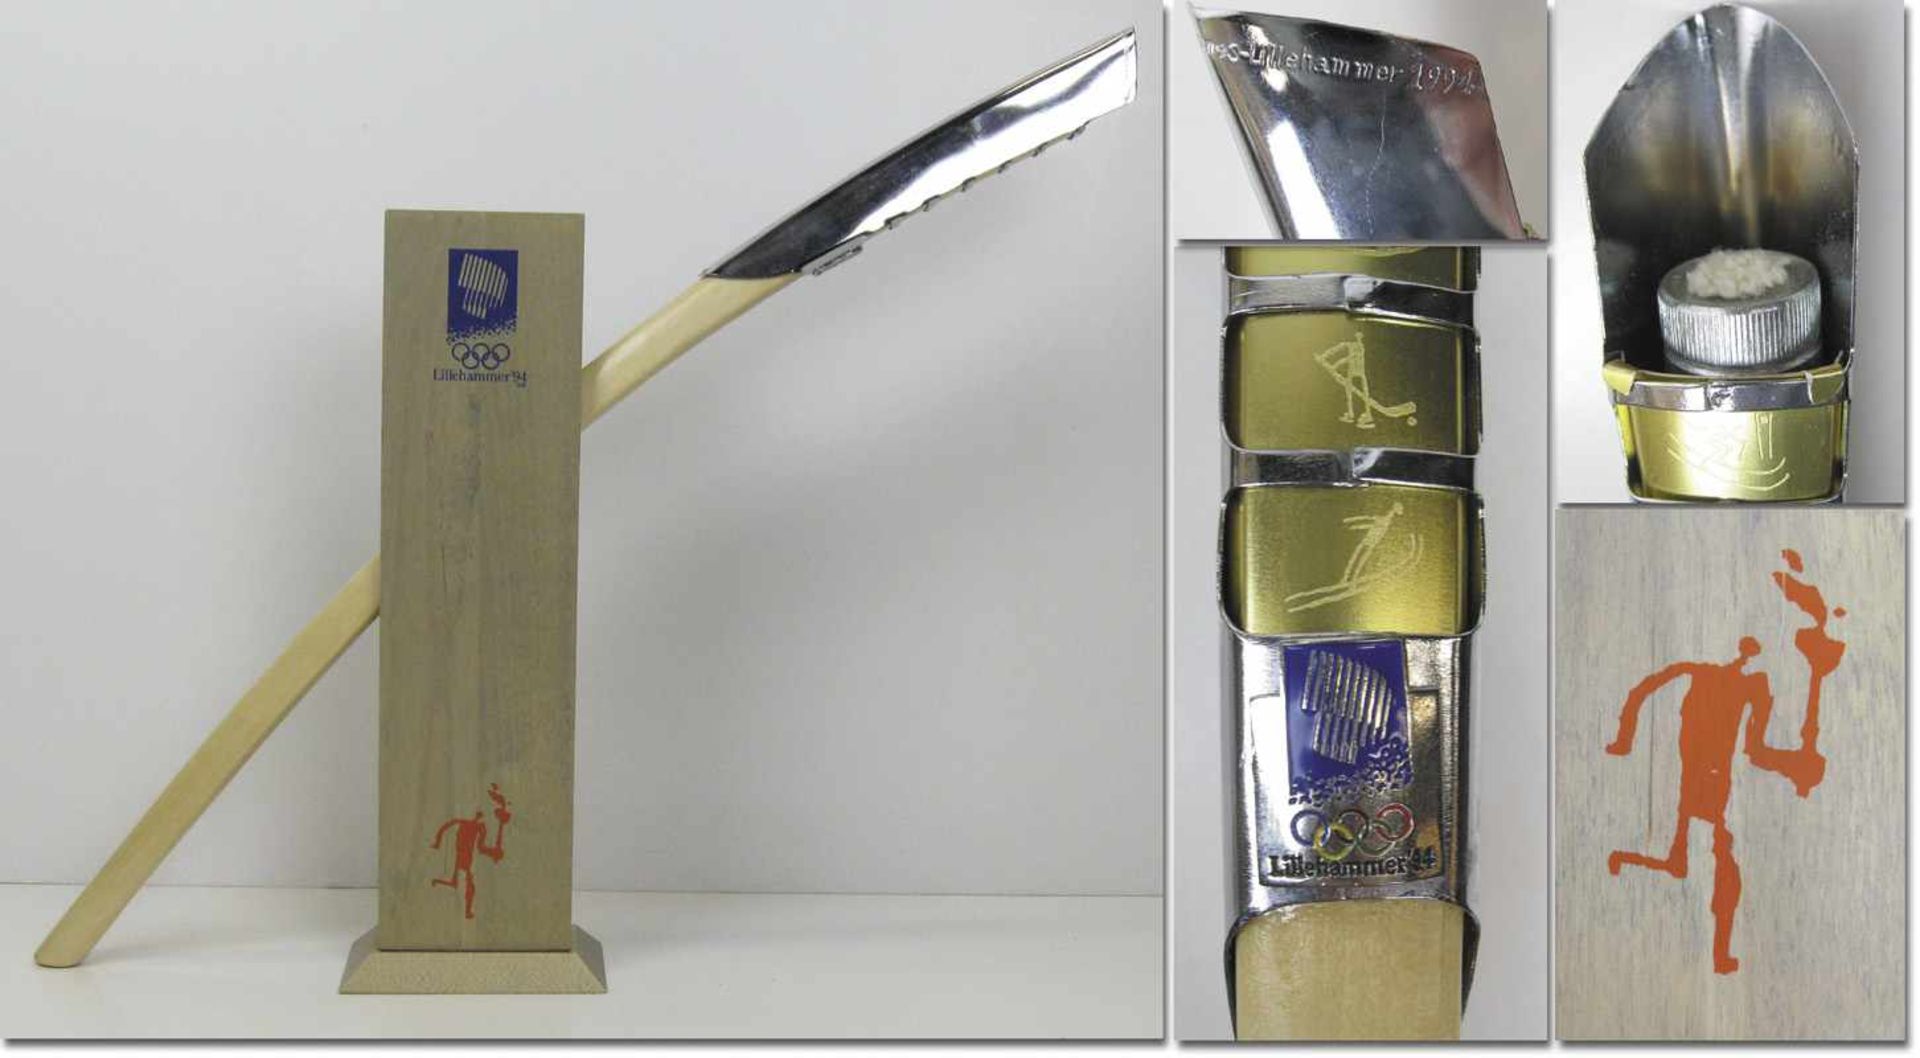 Olympic Games 1994. Official Miniatur Torch 60 - The original torch was 2 metres long and is